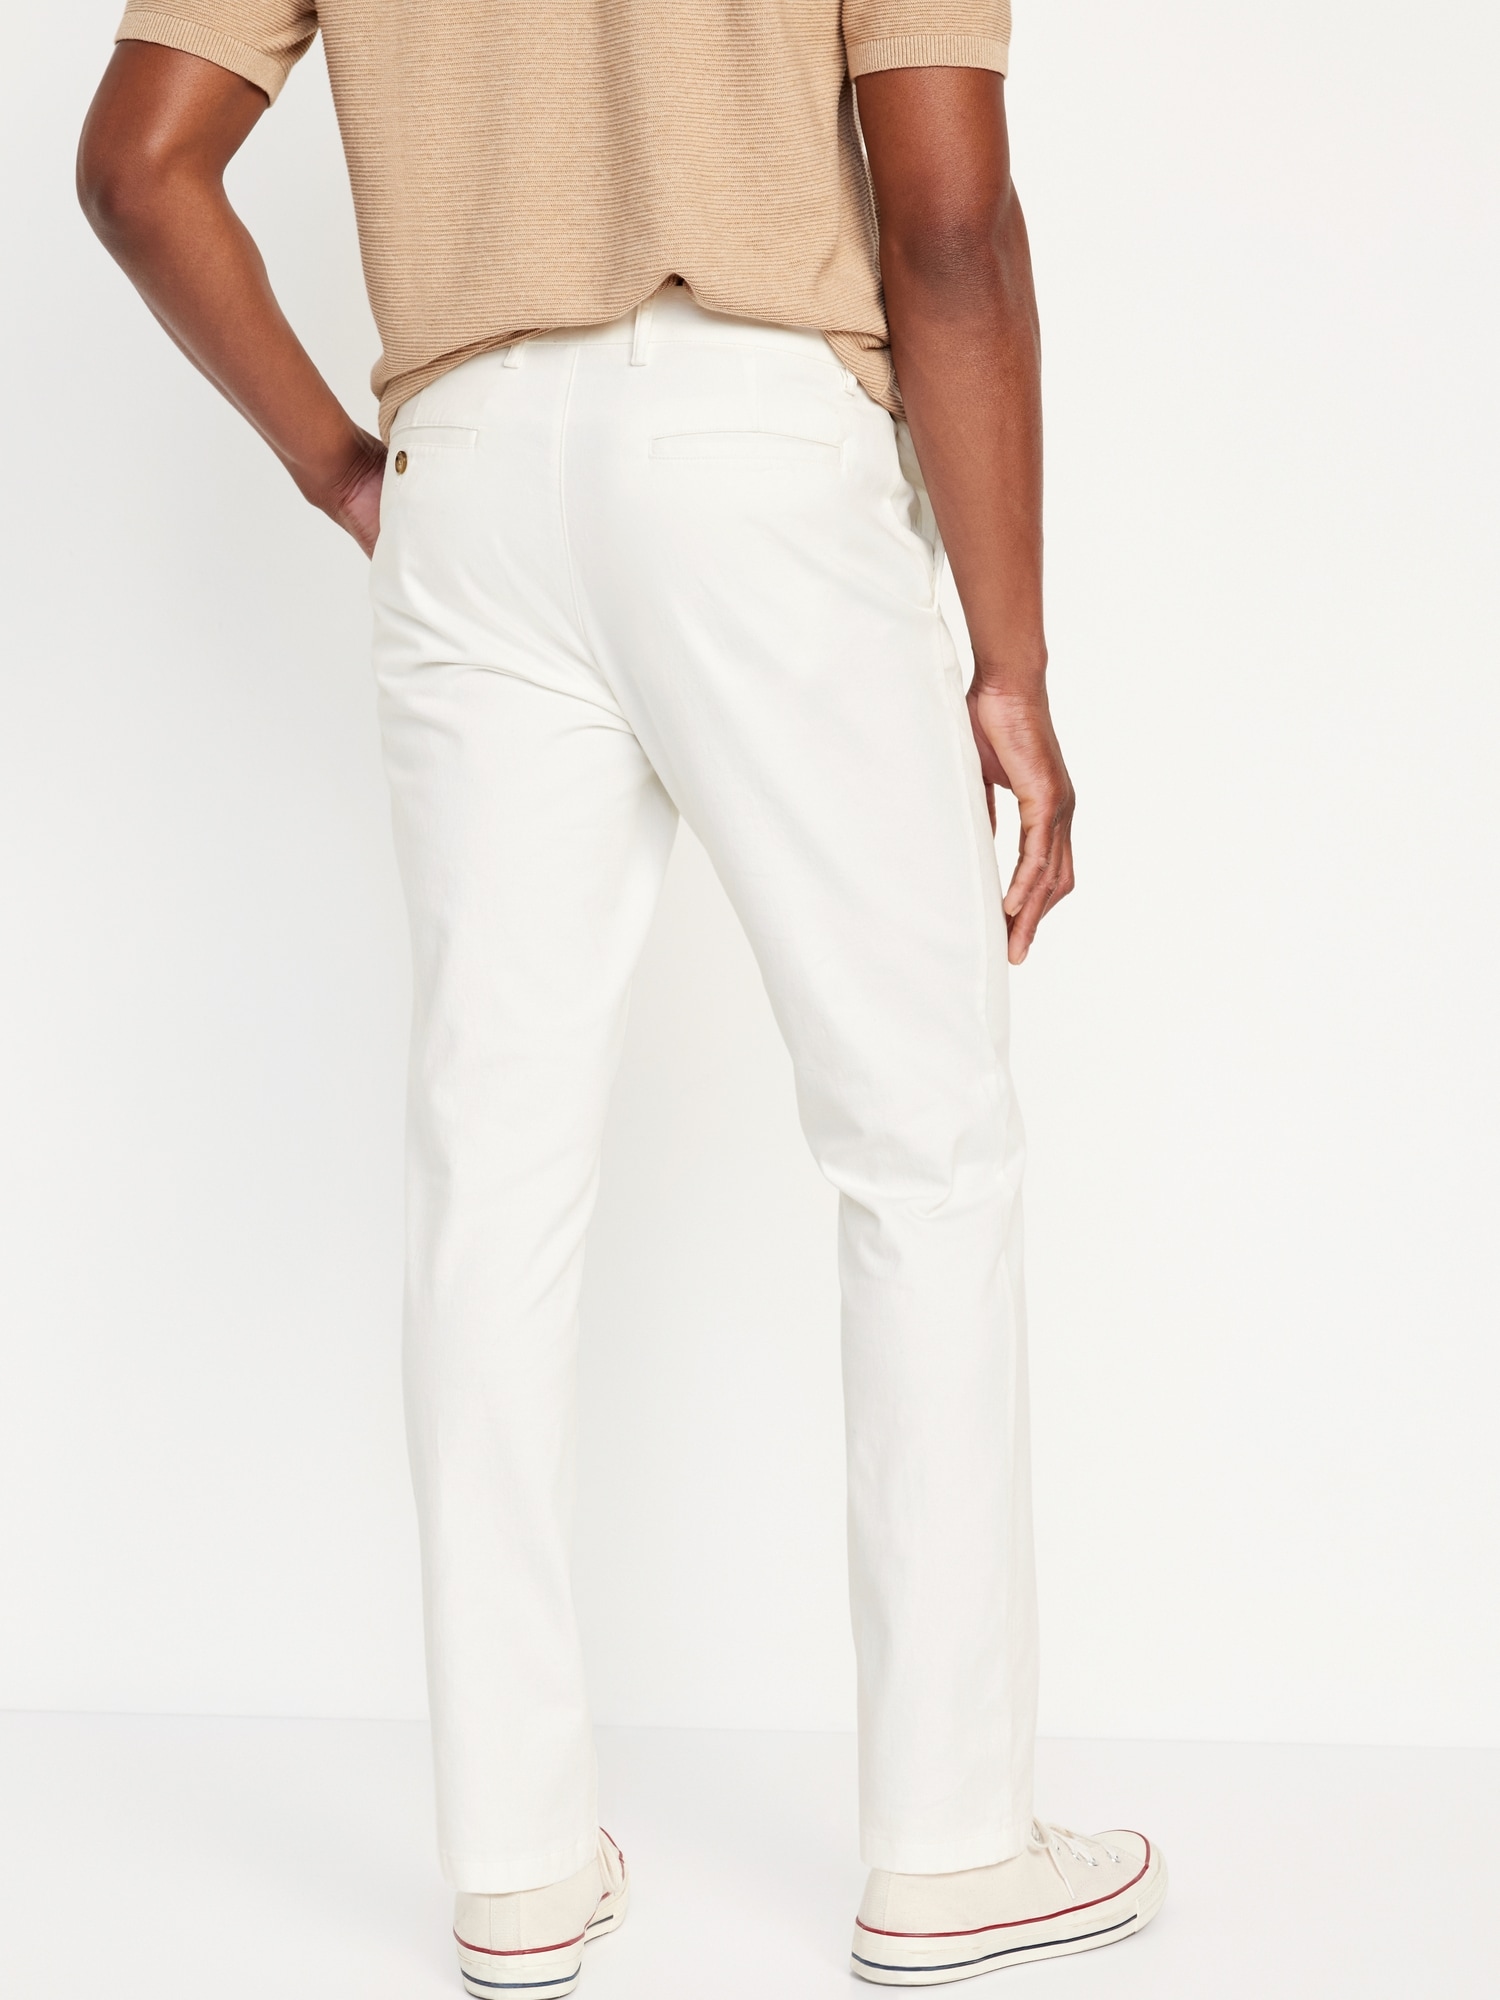 Slim Built-In Flex Rotation Chino Pants | Old Navy